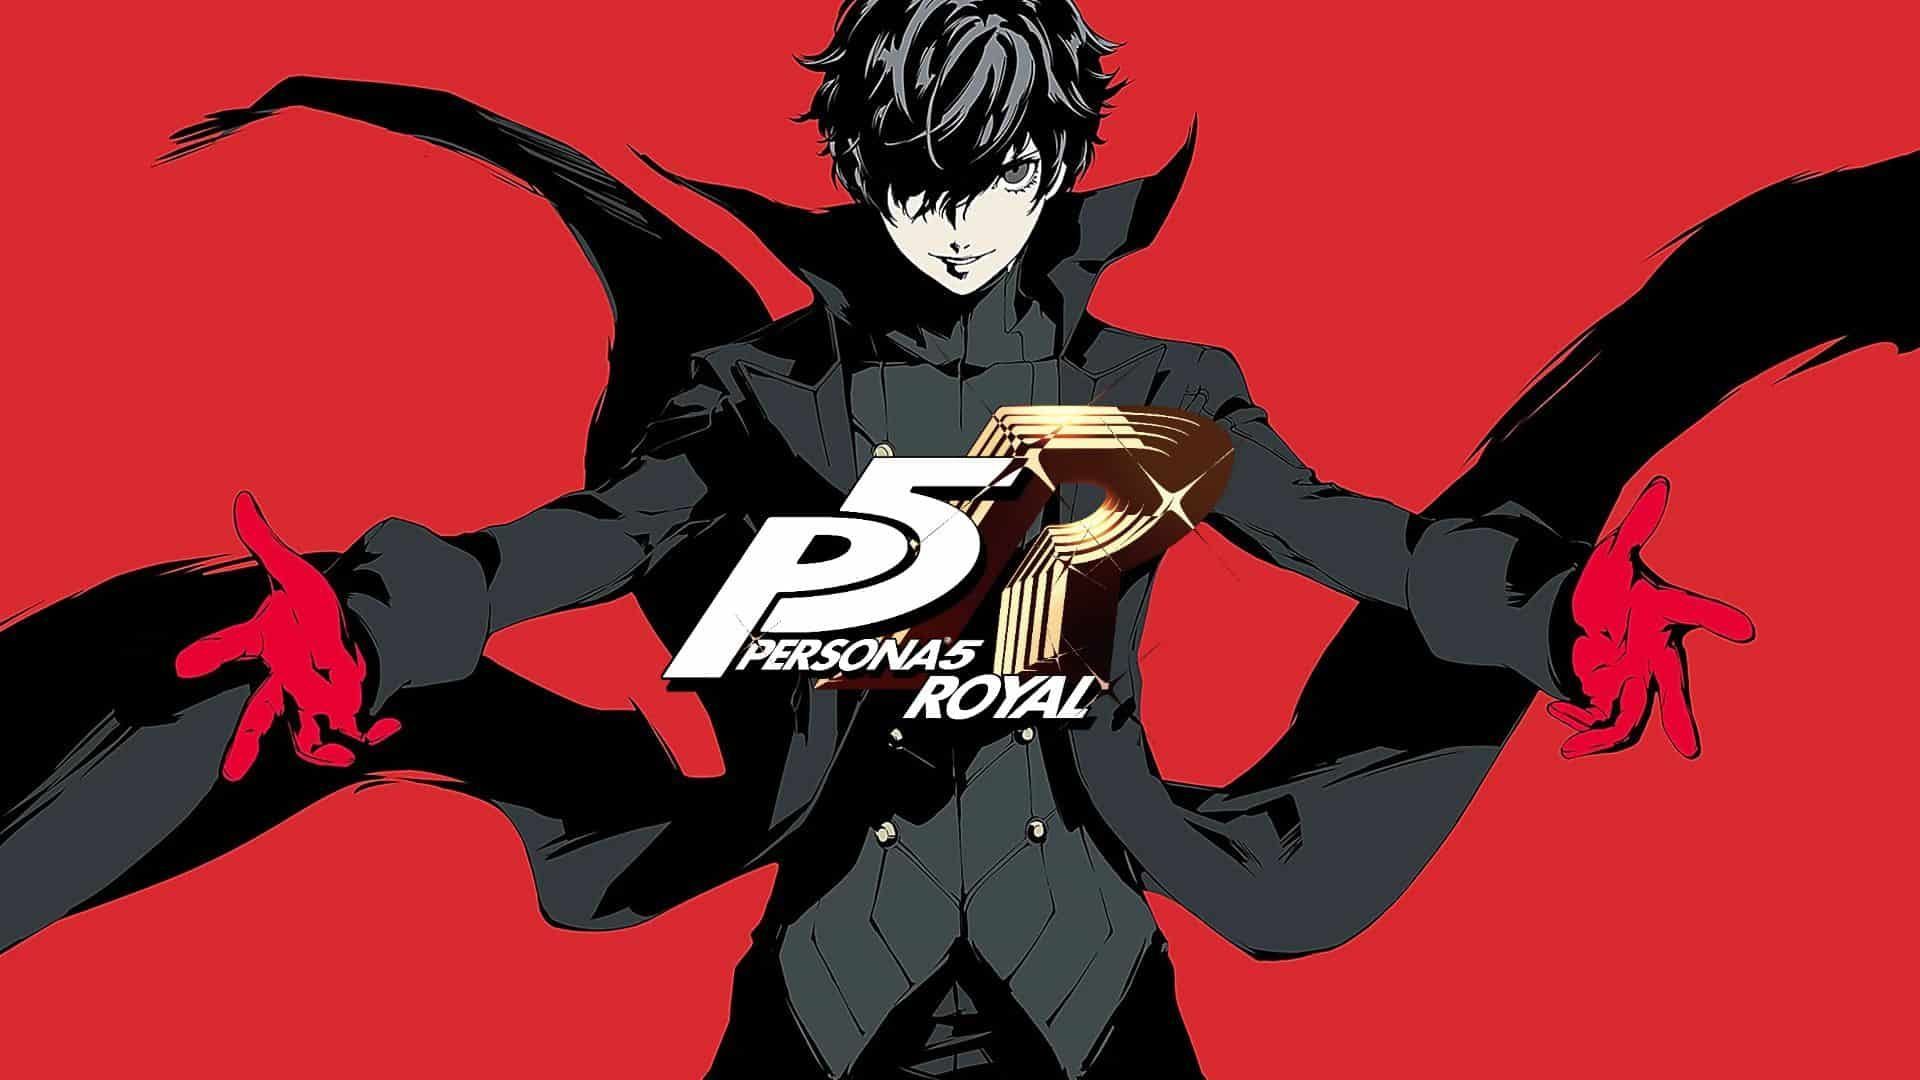 Persona 5 card game is coming to steal your heart (and money) next year